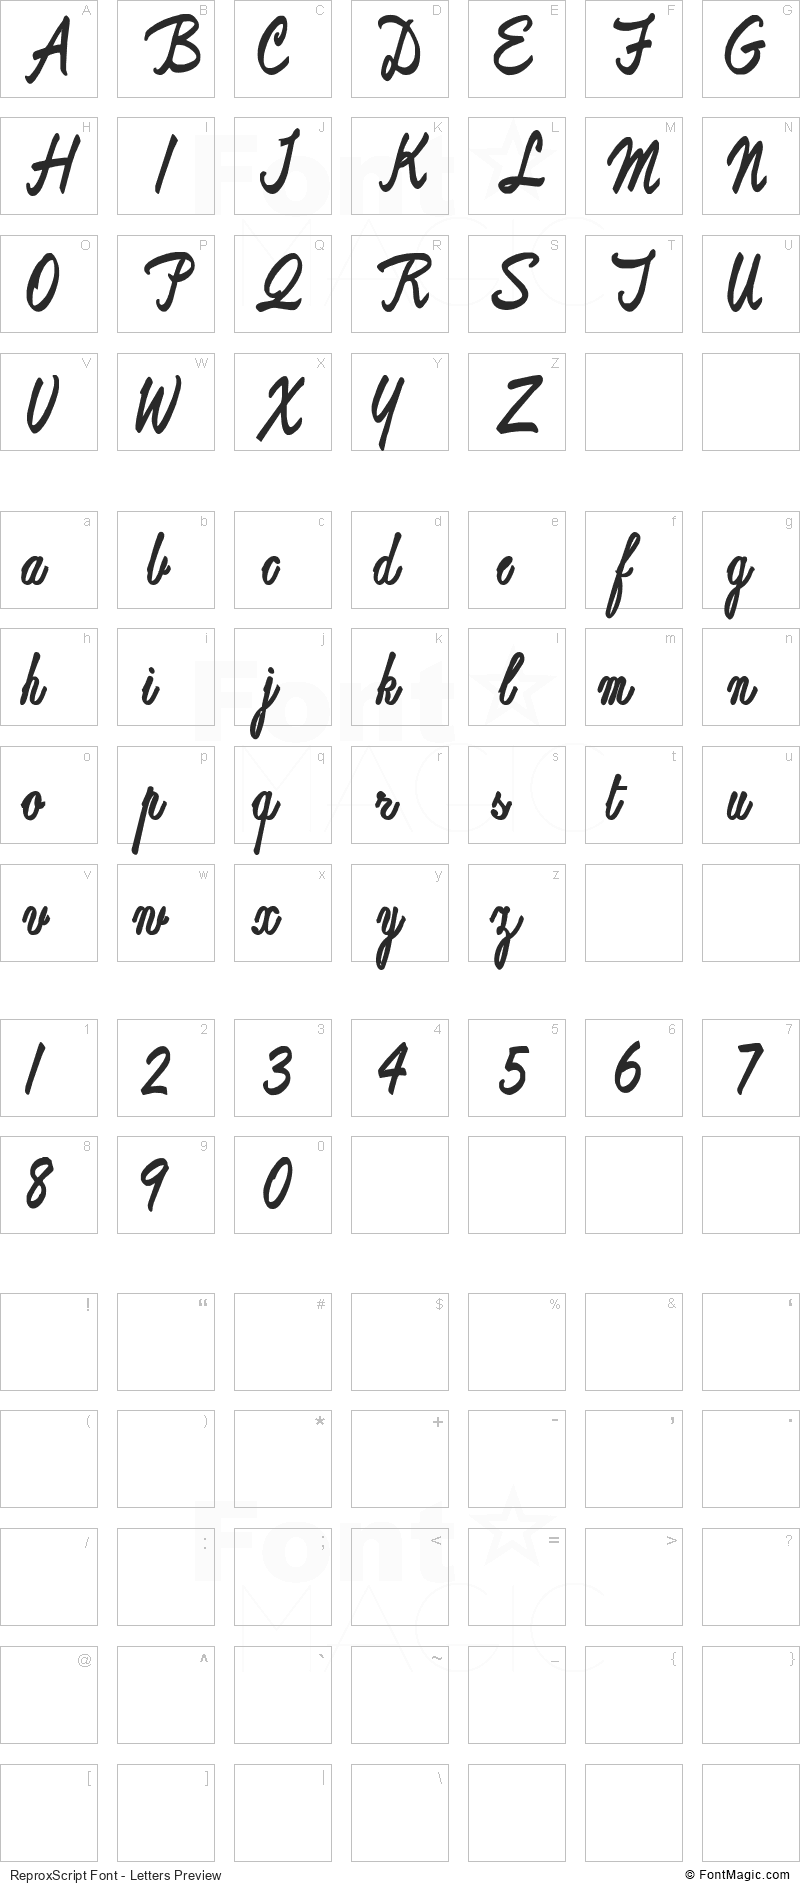 ReproxScript Font - All Latters Preview Chart